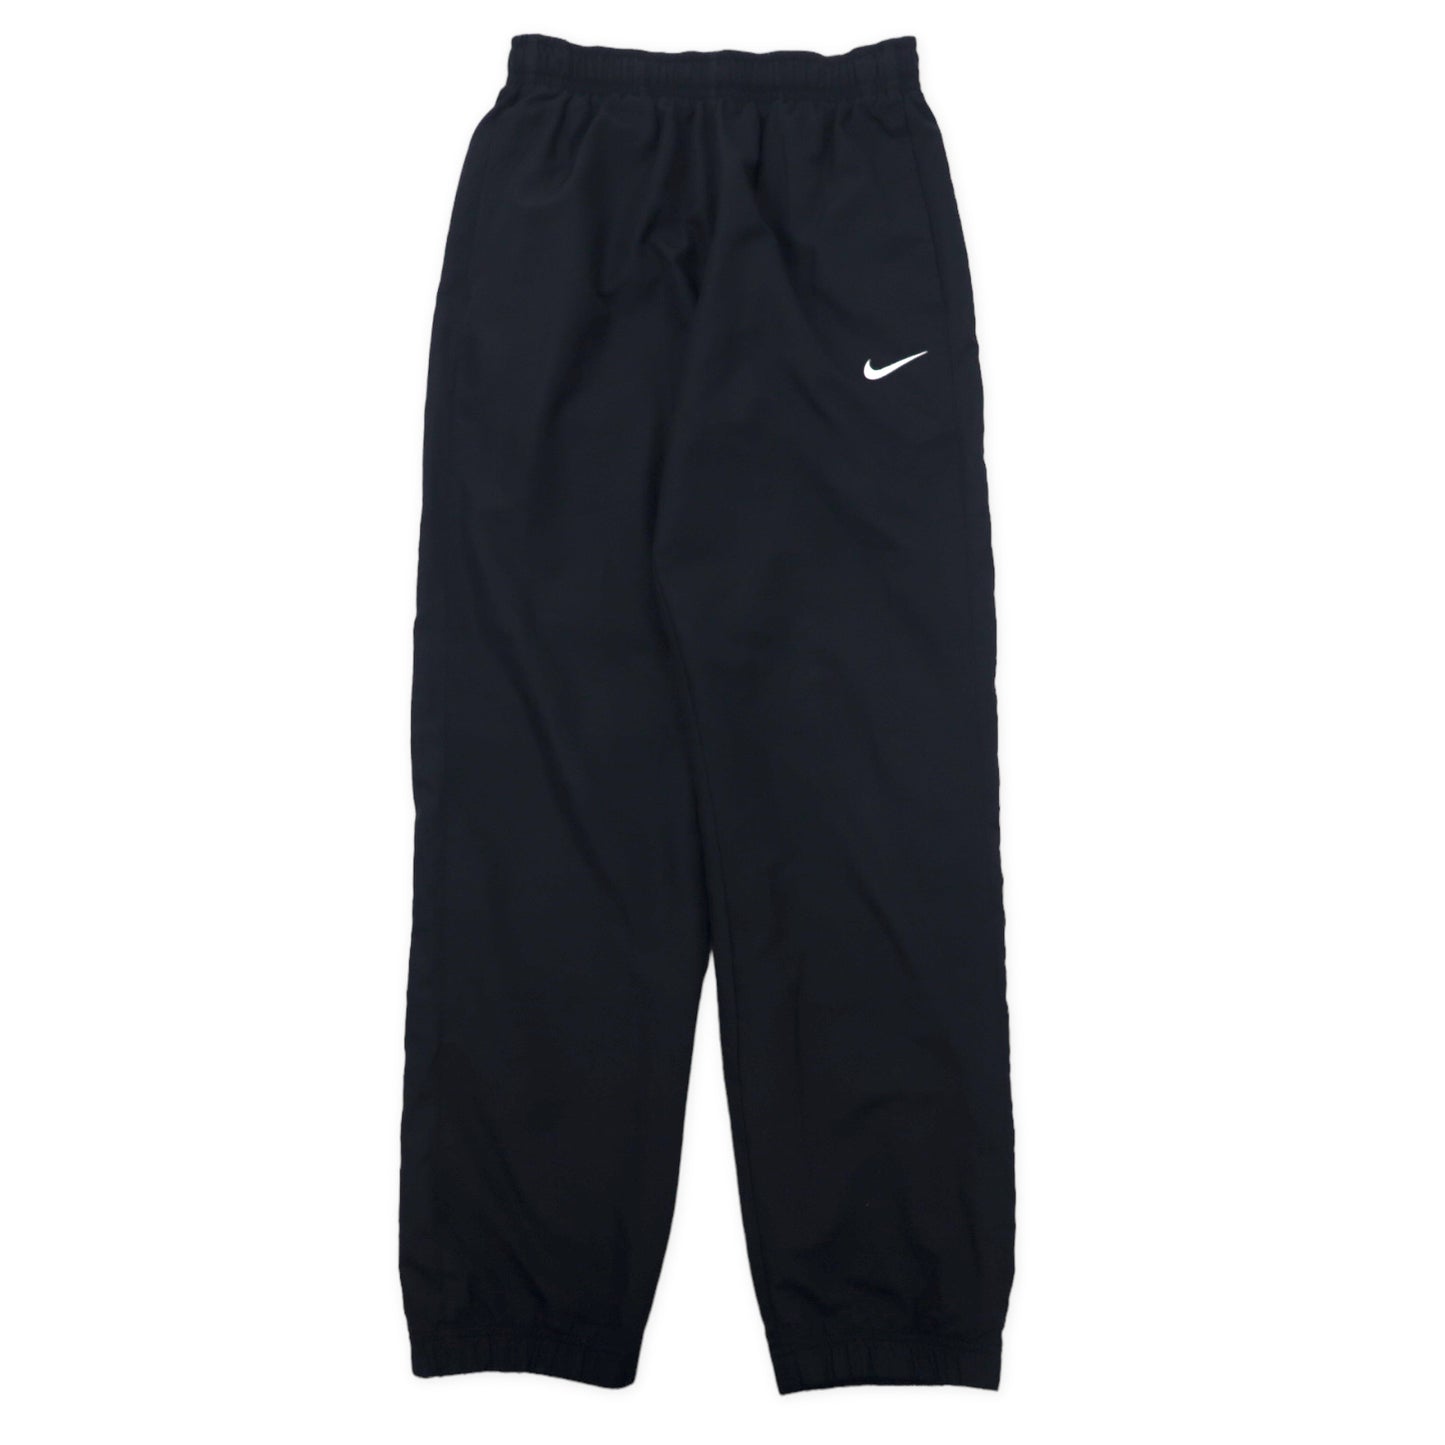 NIKE TRACK PANTS Jersey S Black Polyester Swash logo embroidery